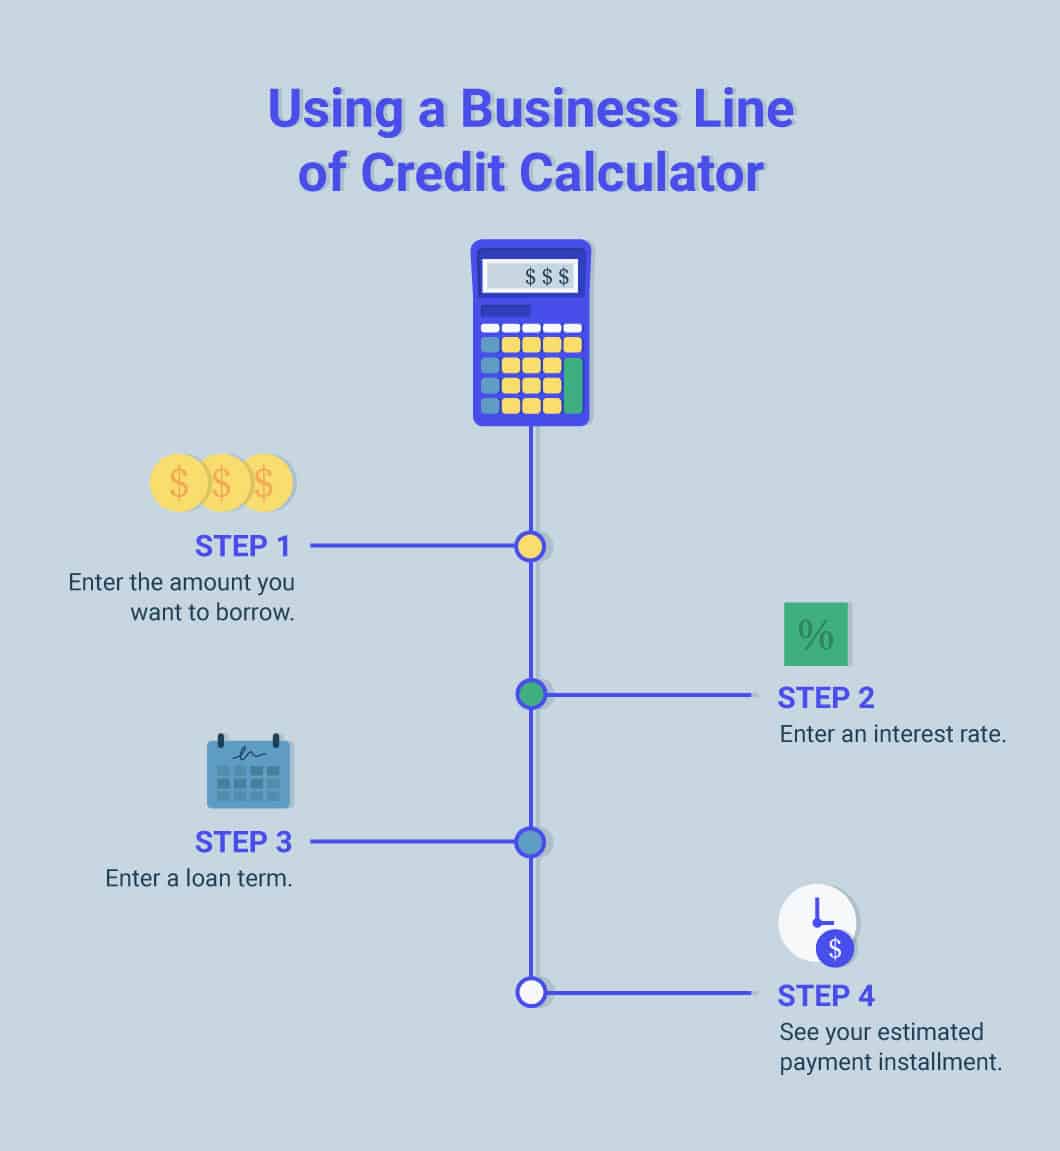 Graphic illustrating the steps involved in using a business line of credit calculator, with images of a calculator, coins, a calendar and percentage symbol